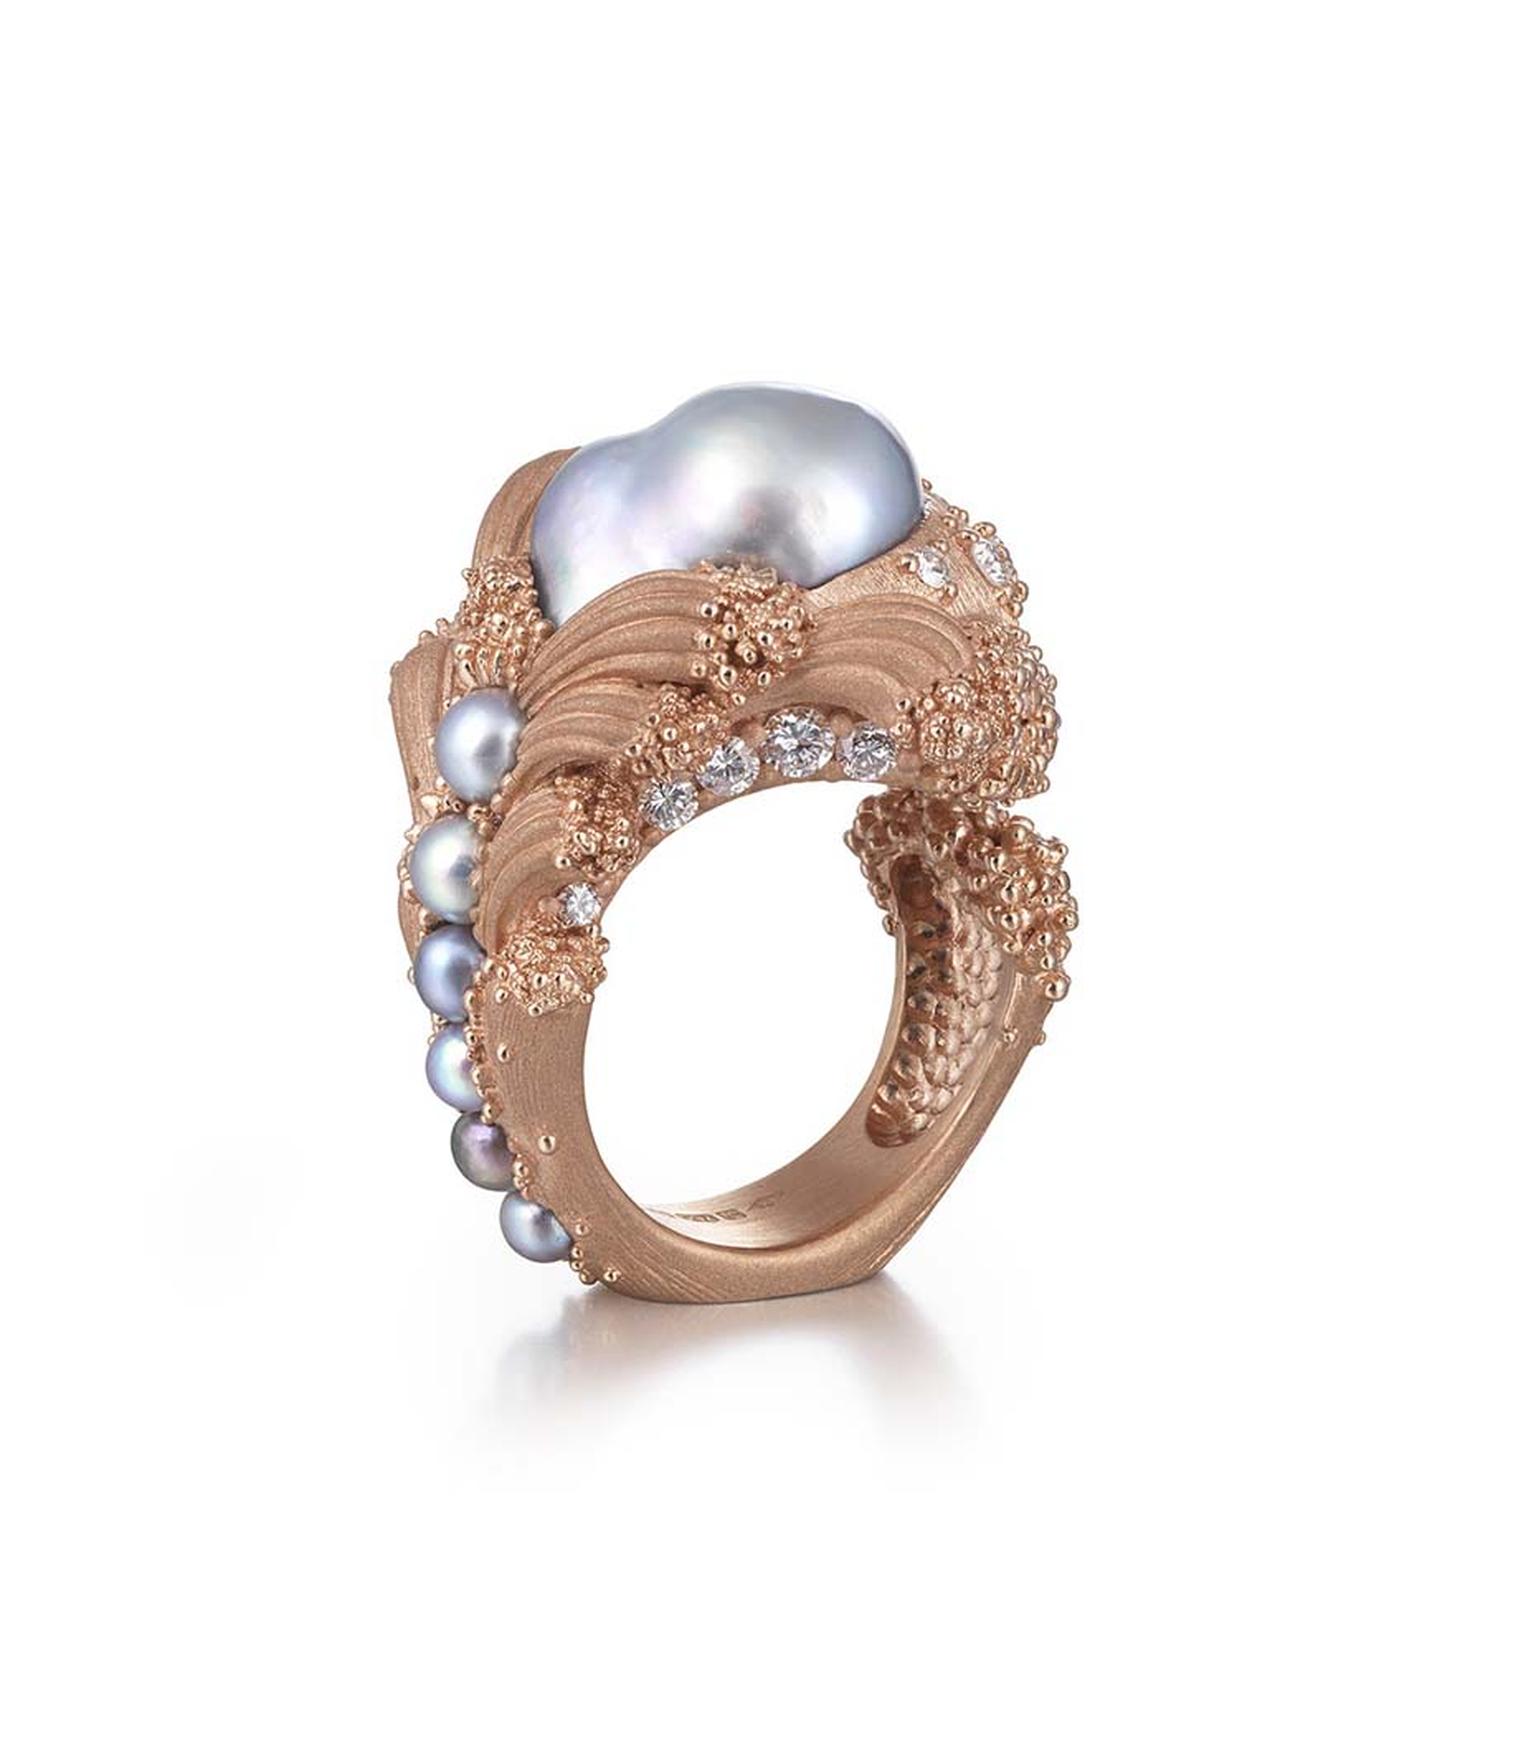 Ornella Iannuzzi's "Uprising" baroque pearl ring, currently on display at Goldsmiths' Hall, was the winner of two prestigious gold awards at the recent Goldsmiths' Craft & Design Council Awards.